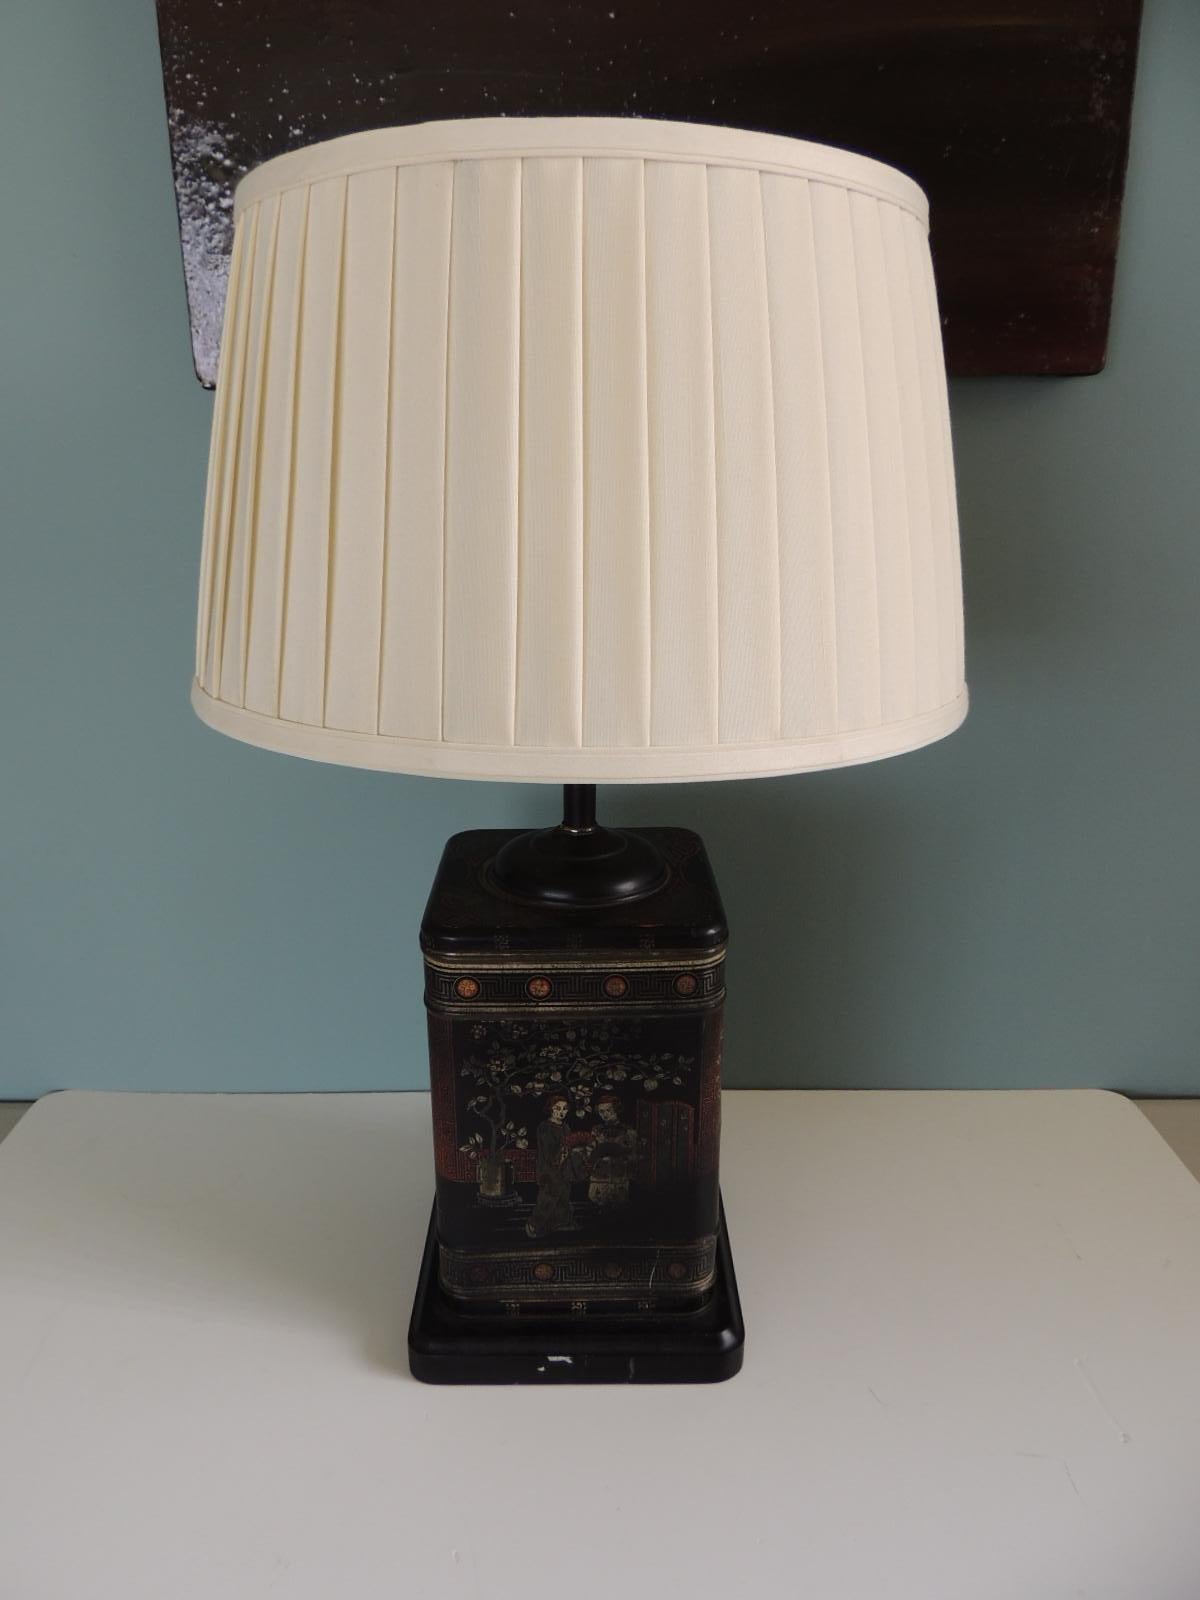 Vintage Black Asian Tea Canister Table Lamp, with pleated
Linen lampshade in natural. Wood square base and wood finial.
Size: 11